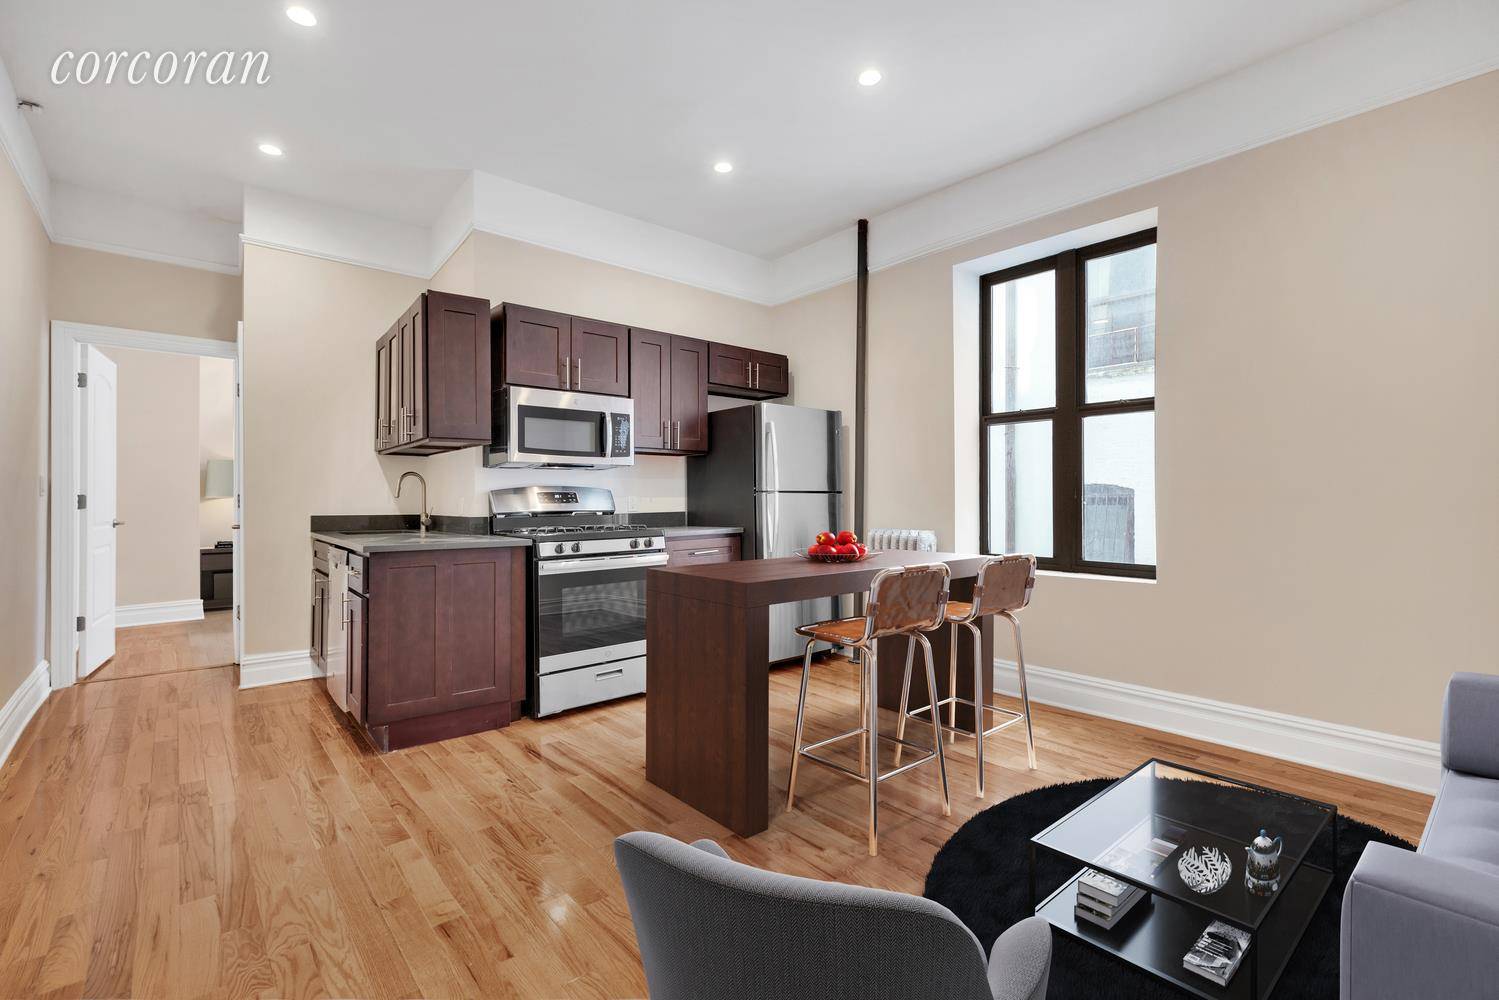 OPEN HOUSE FOR SUNDAY, MARCH 22ND HAS BEEN CANCELLEDSponsor owned one bedroom one bathroom home in lovely 69 Tiemann Place, in the heart of Morningside Heights.